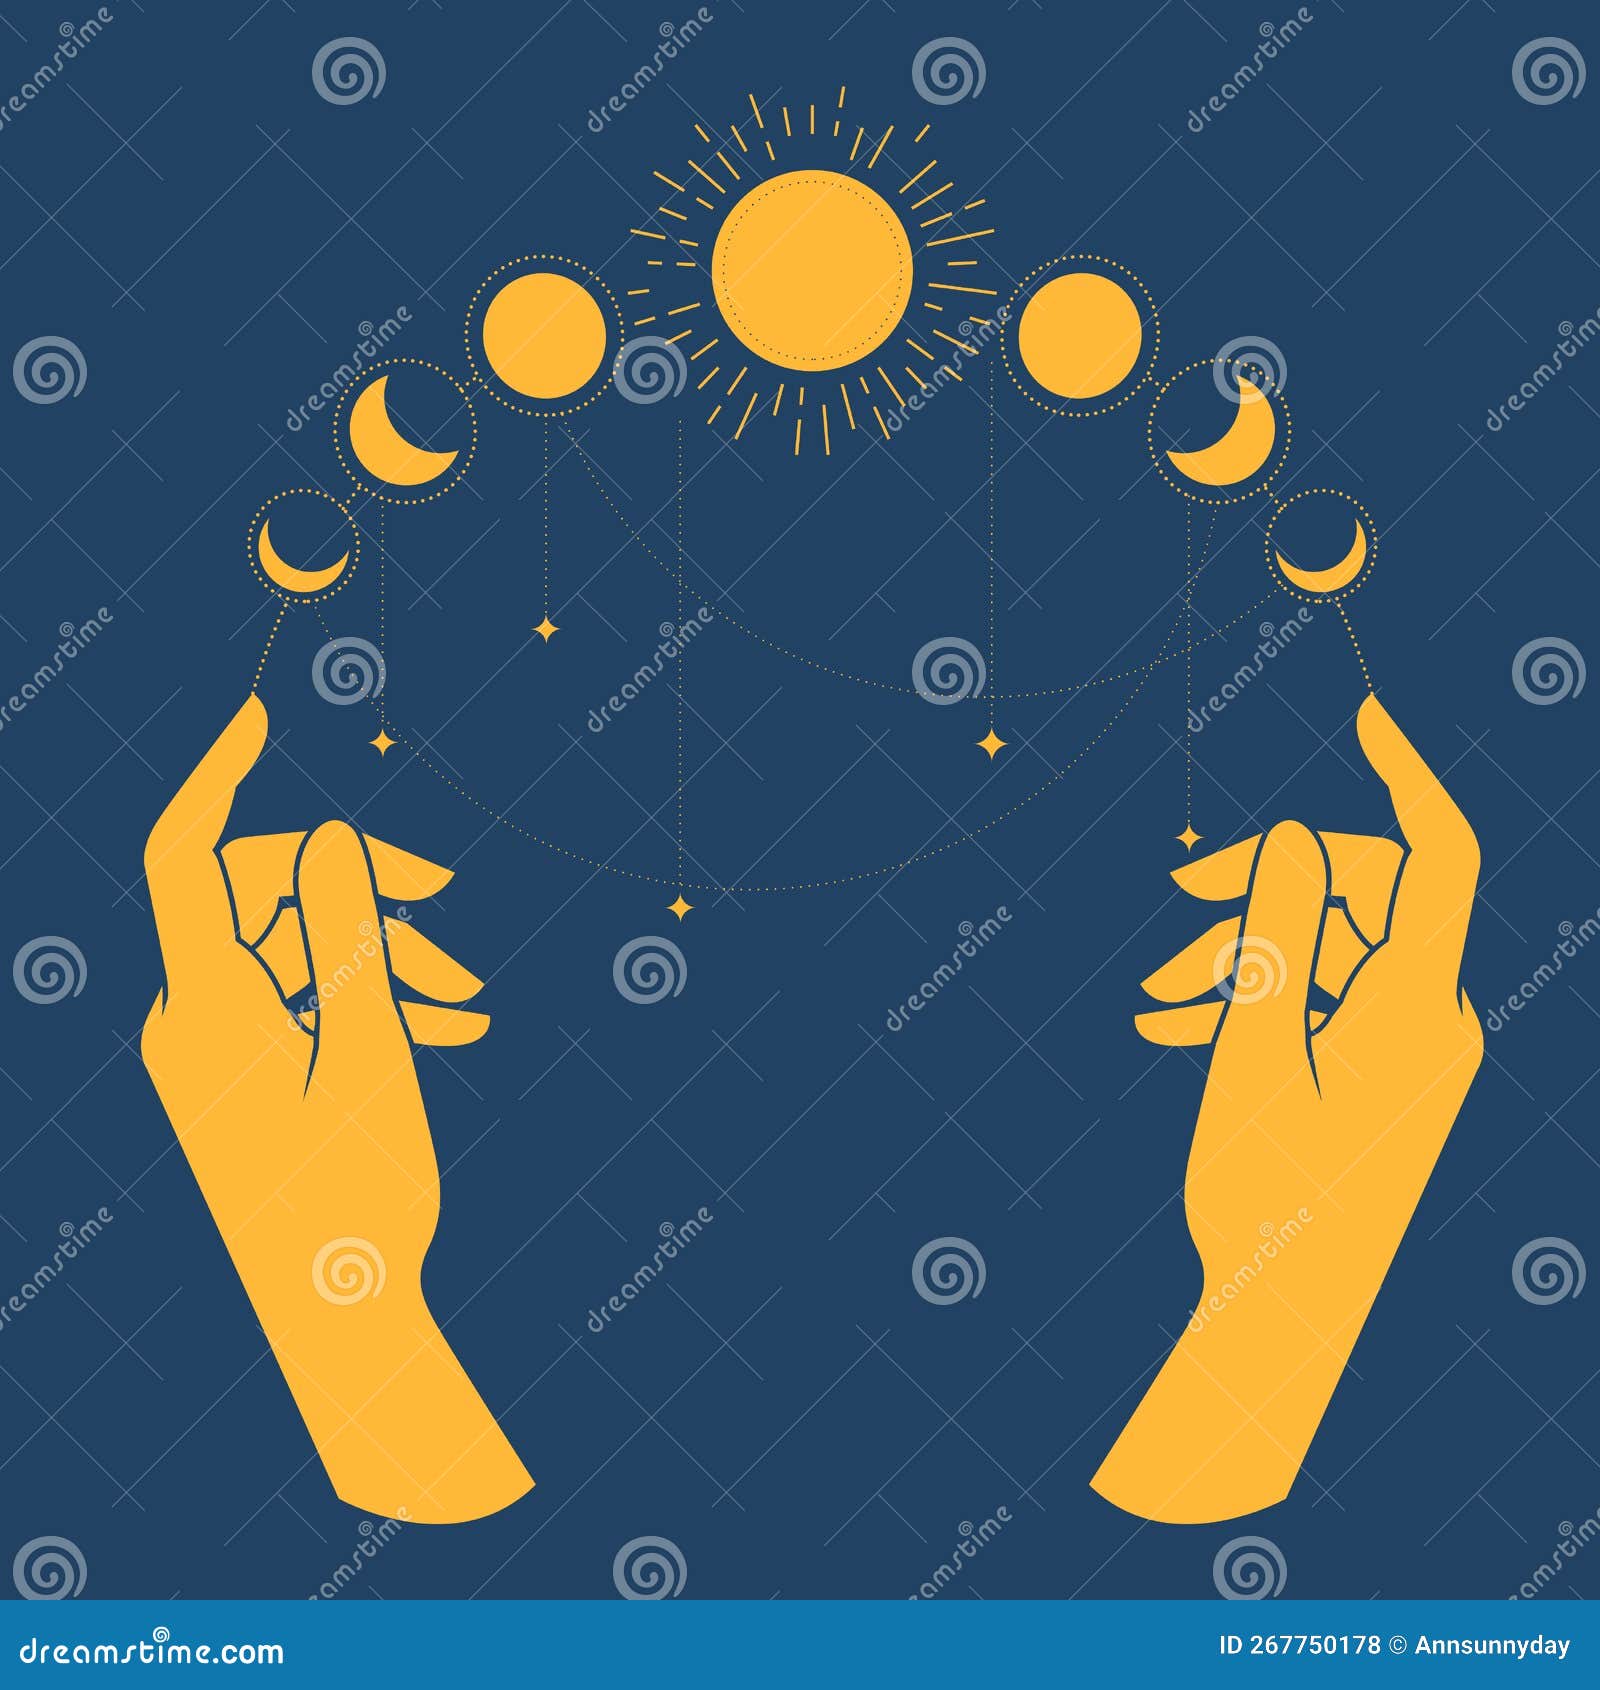 hands of sorcerer with lunar phases on fingers, moon fortunetelling, horoscope and astrology prediction